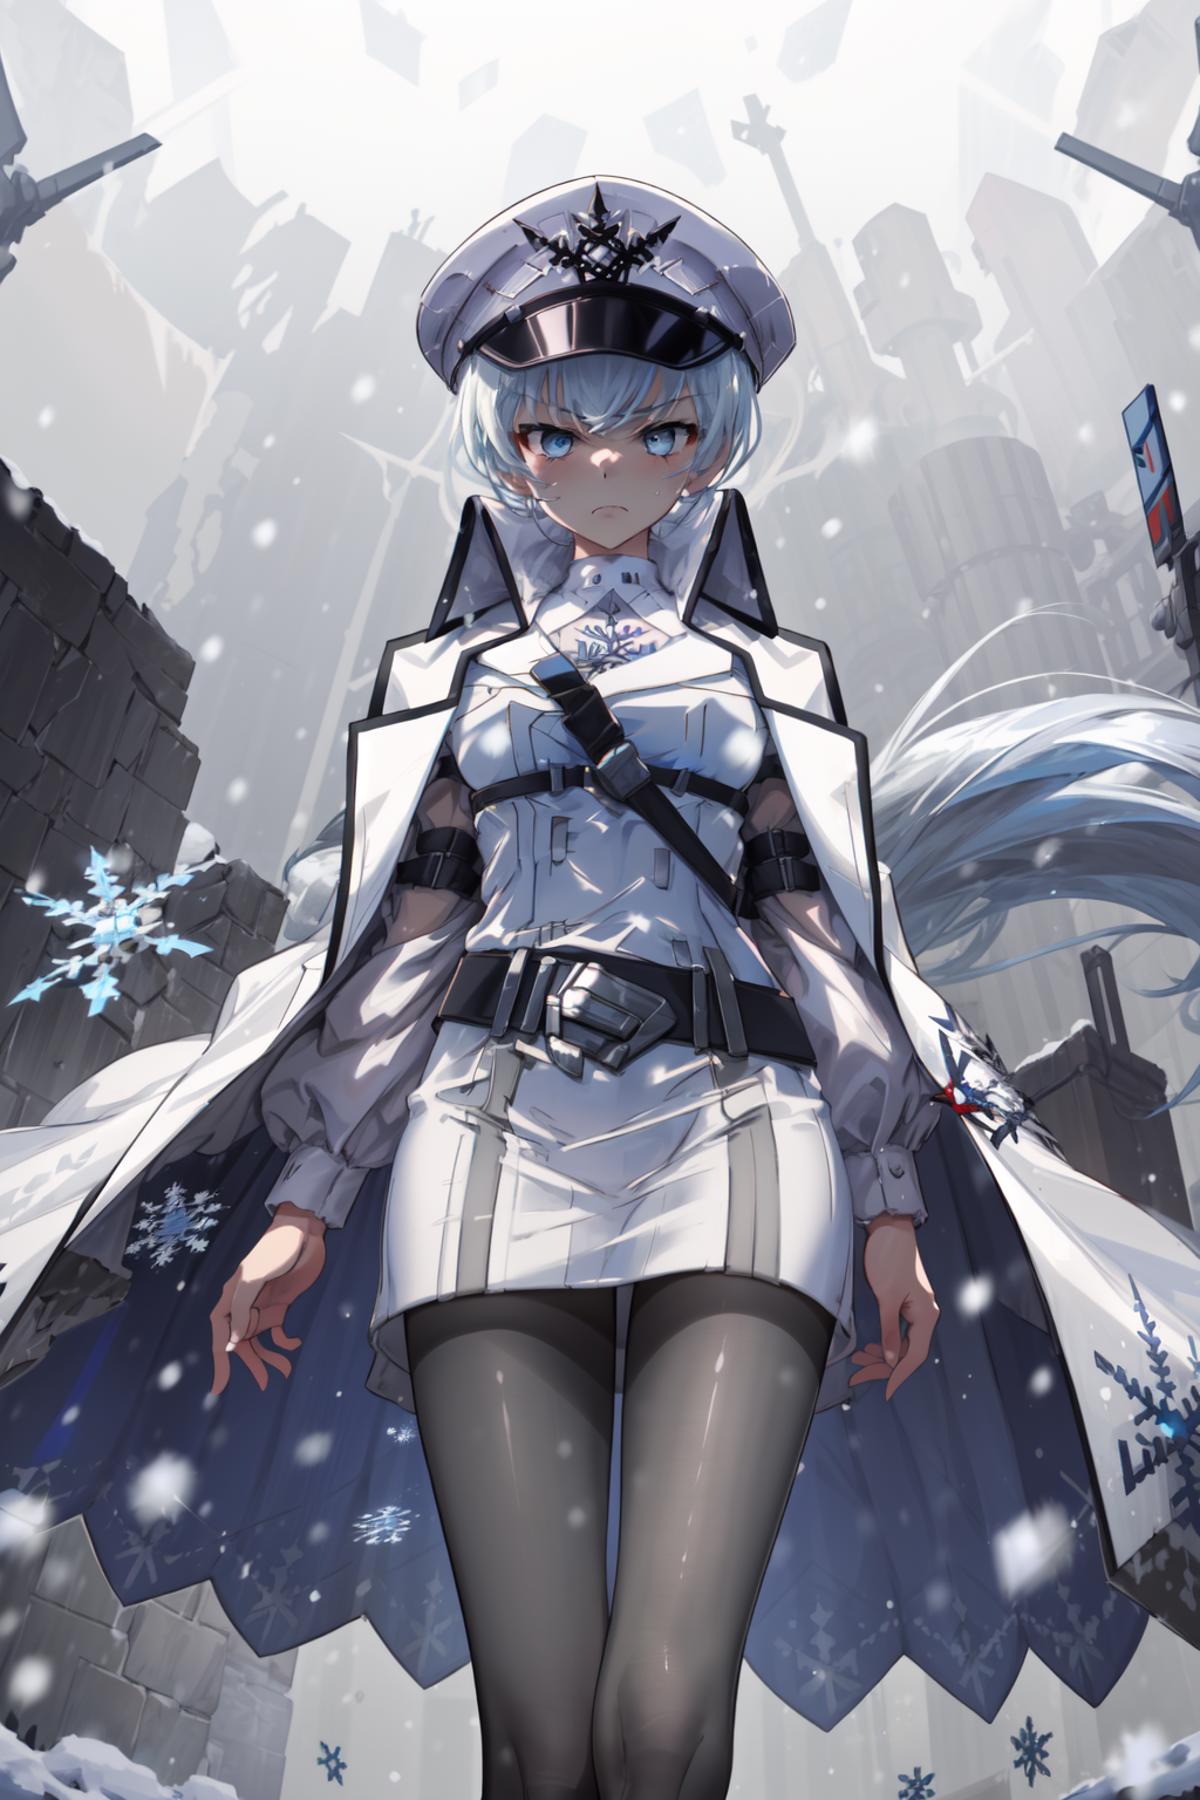 Weiss Schnee | RWBY image by UnknownNo3